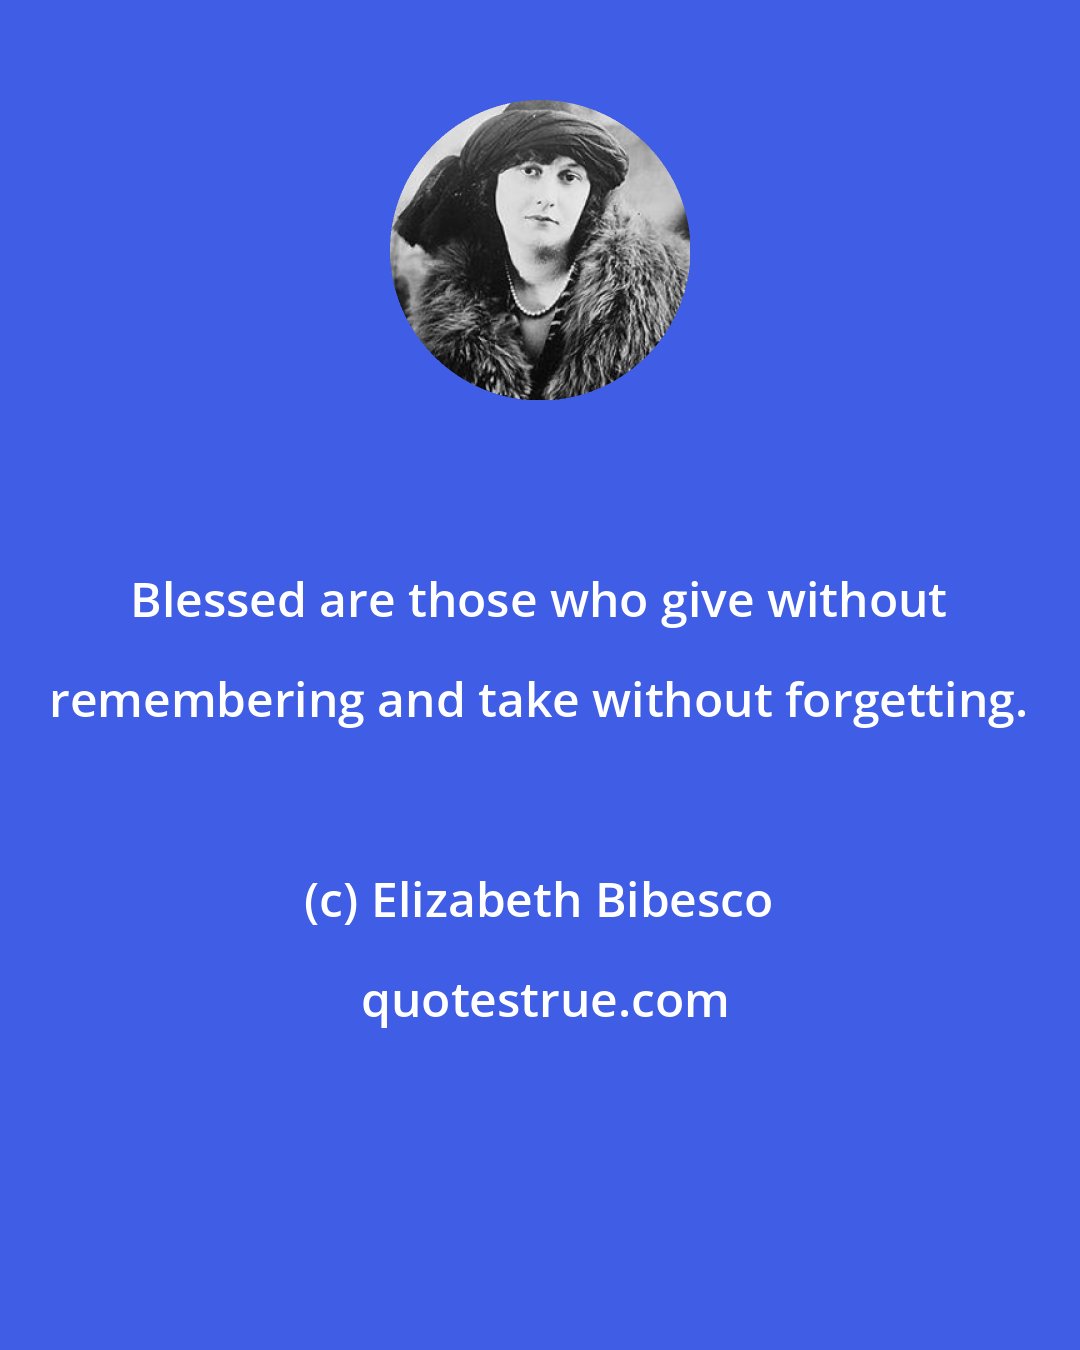 Elizabeth Bibesco: Blessed are those who give without remembering and take without forgetting.